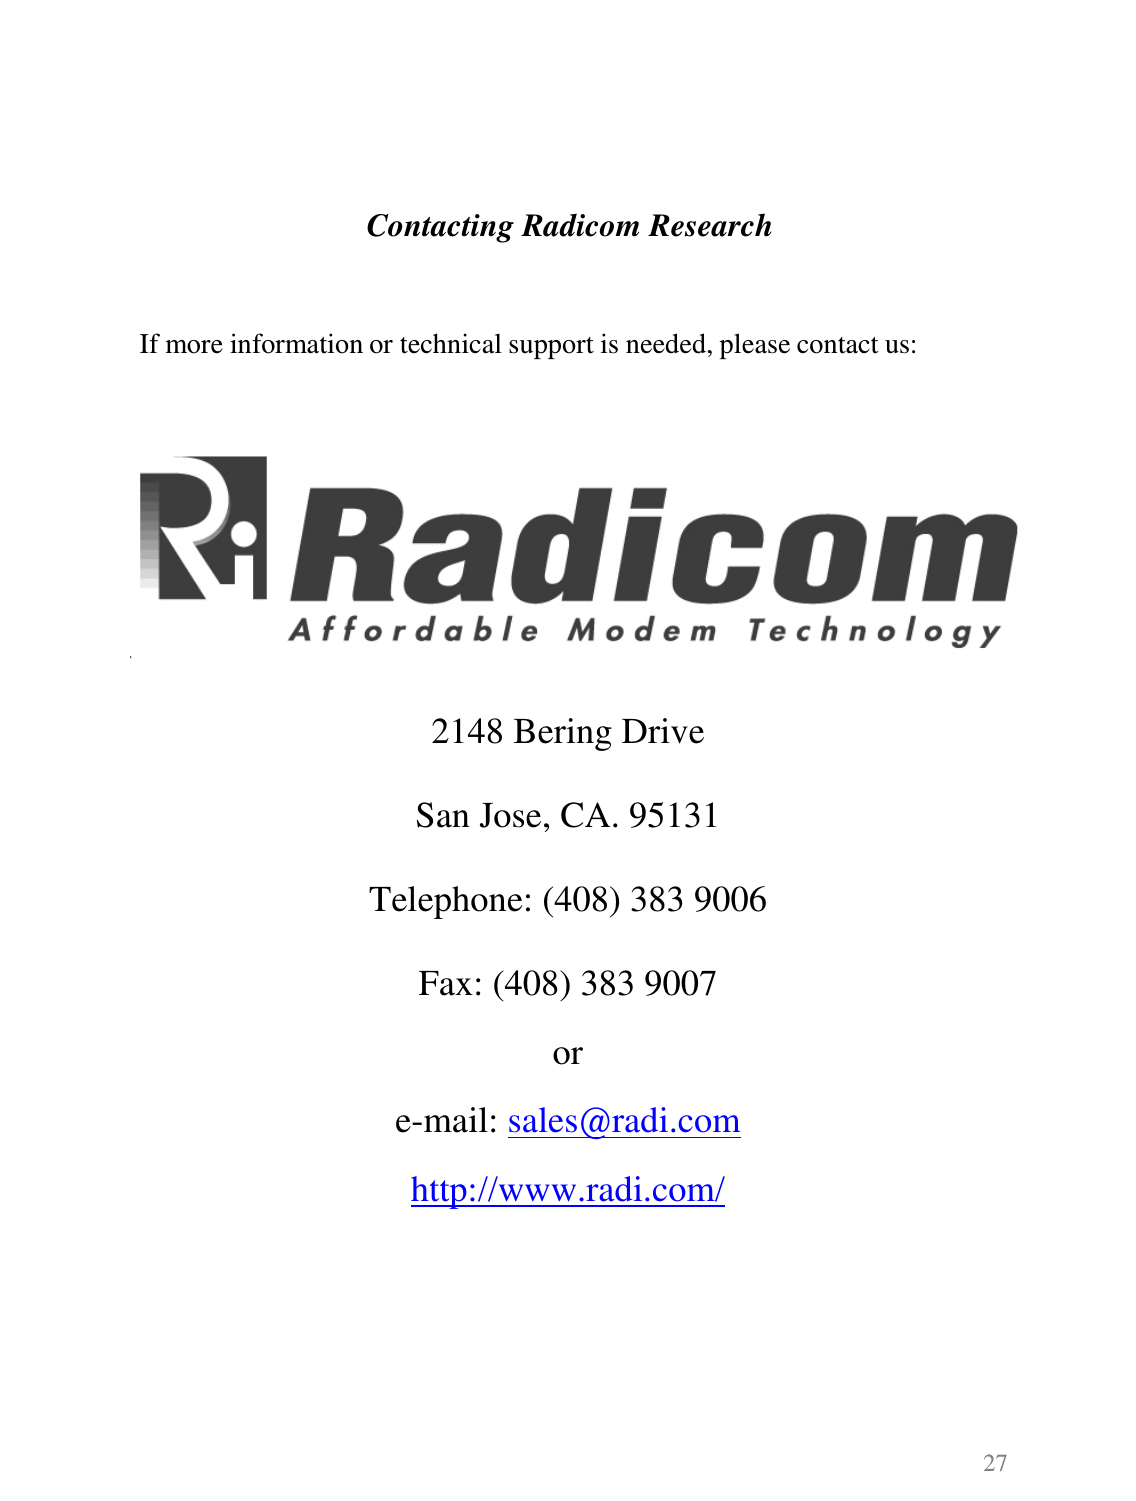      Contacting Radicom Research     If more information or technical support is needed, please contact us:        2148 Bering Drive   San Jose, CA. 95131   Telephone: (408) 383 9006   Fax: (408) 383 9007 or e-mail: sales@radi.com http://www.radi.com/          27 